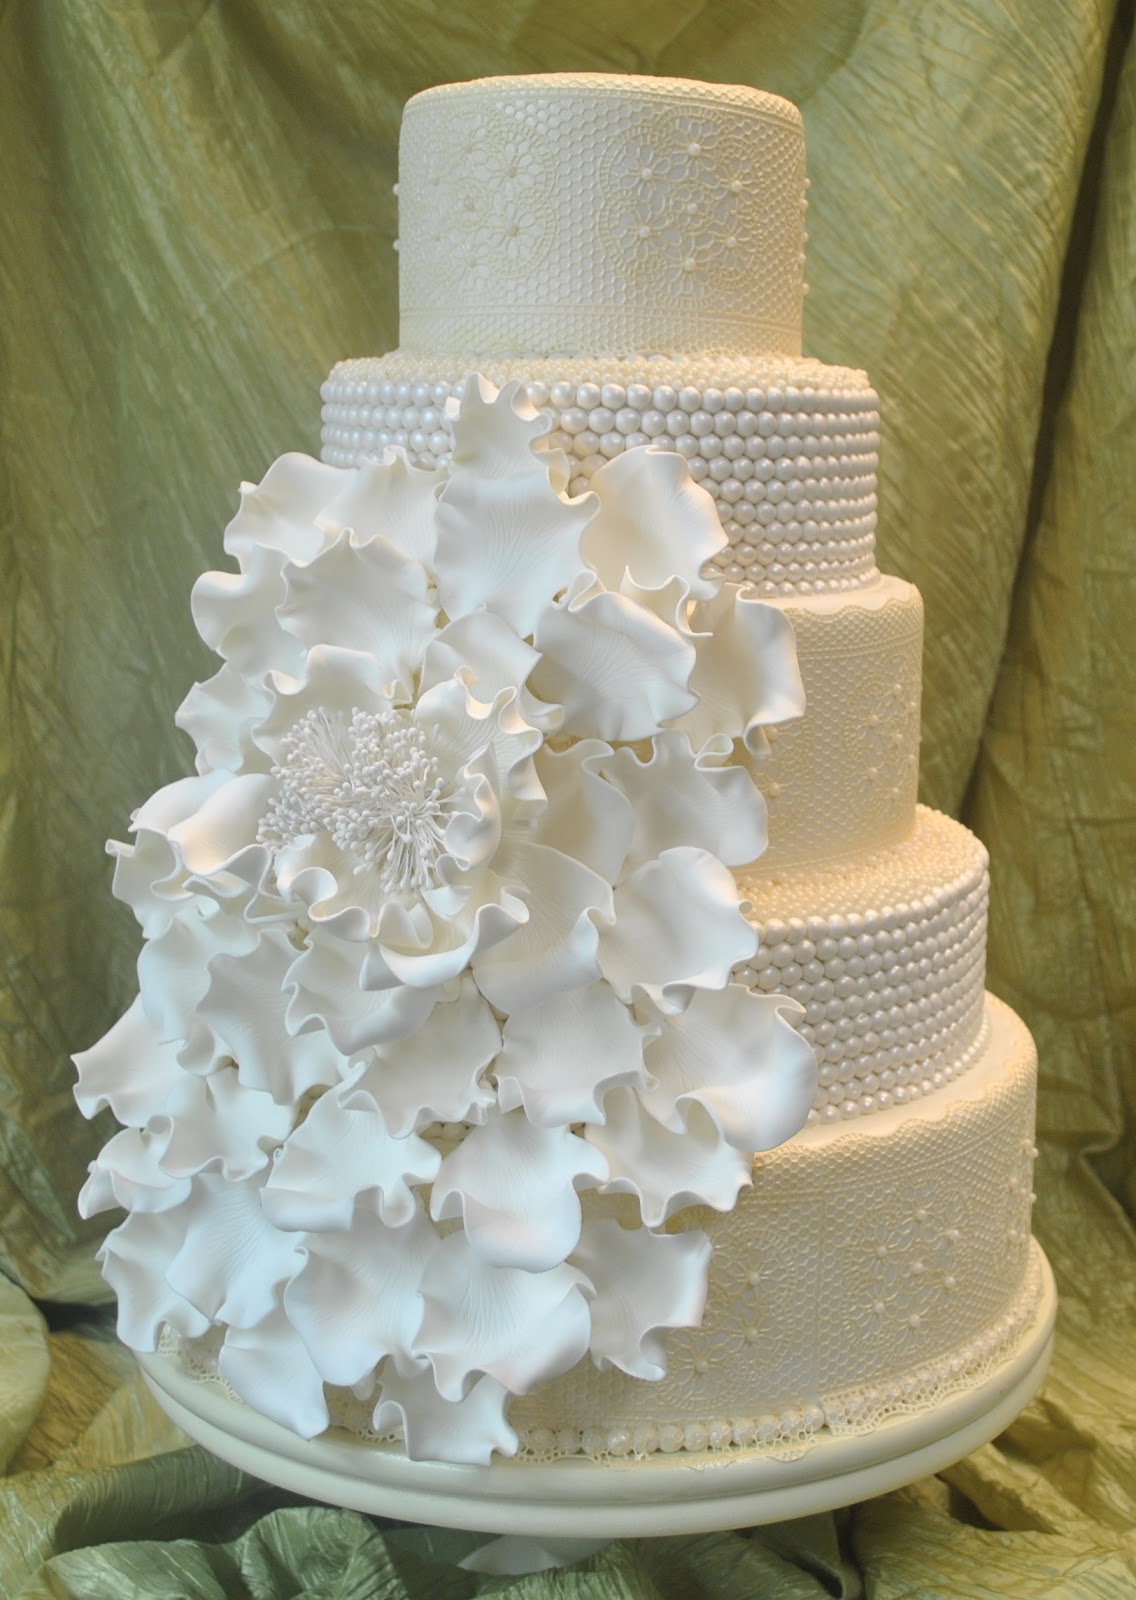 Lace and Pearls Wedding Cake Flowers